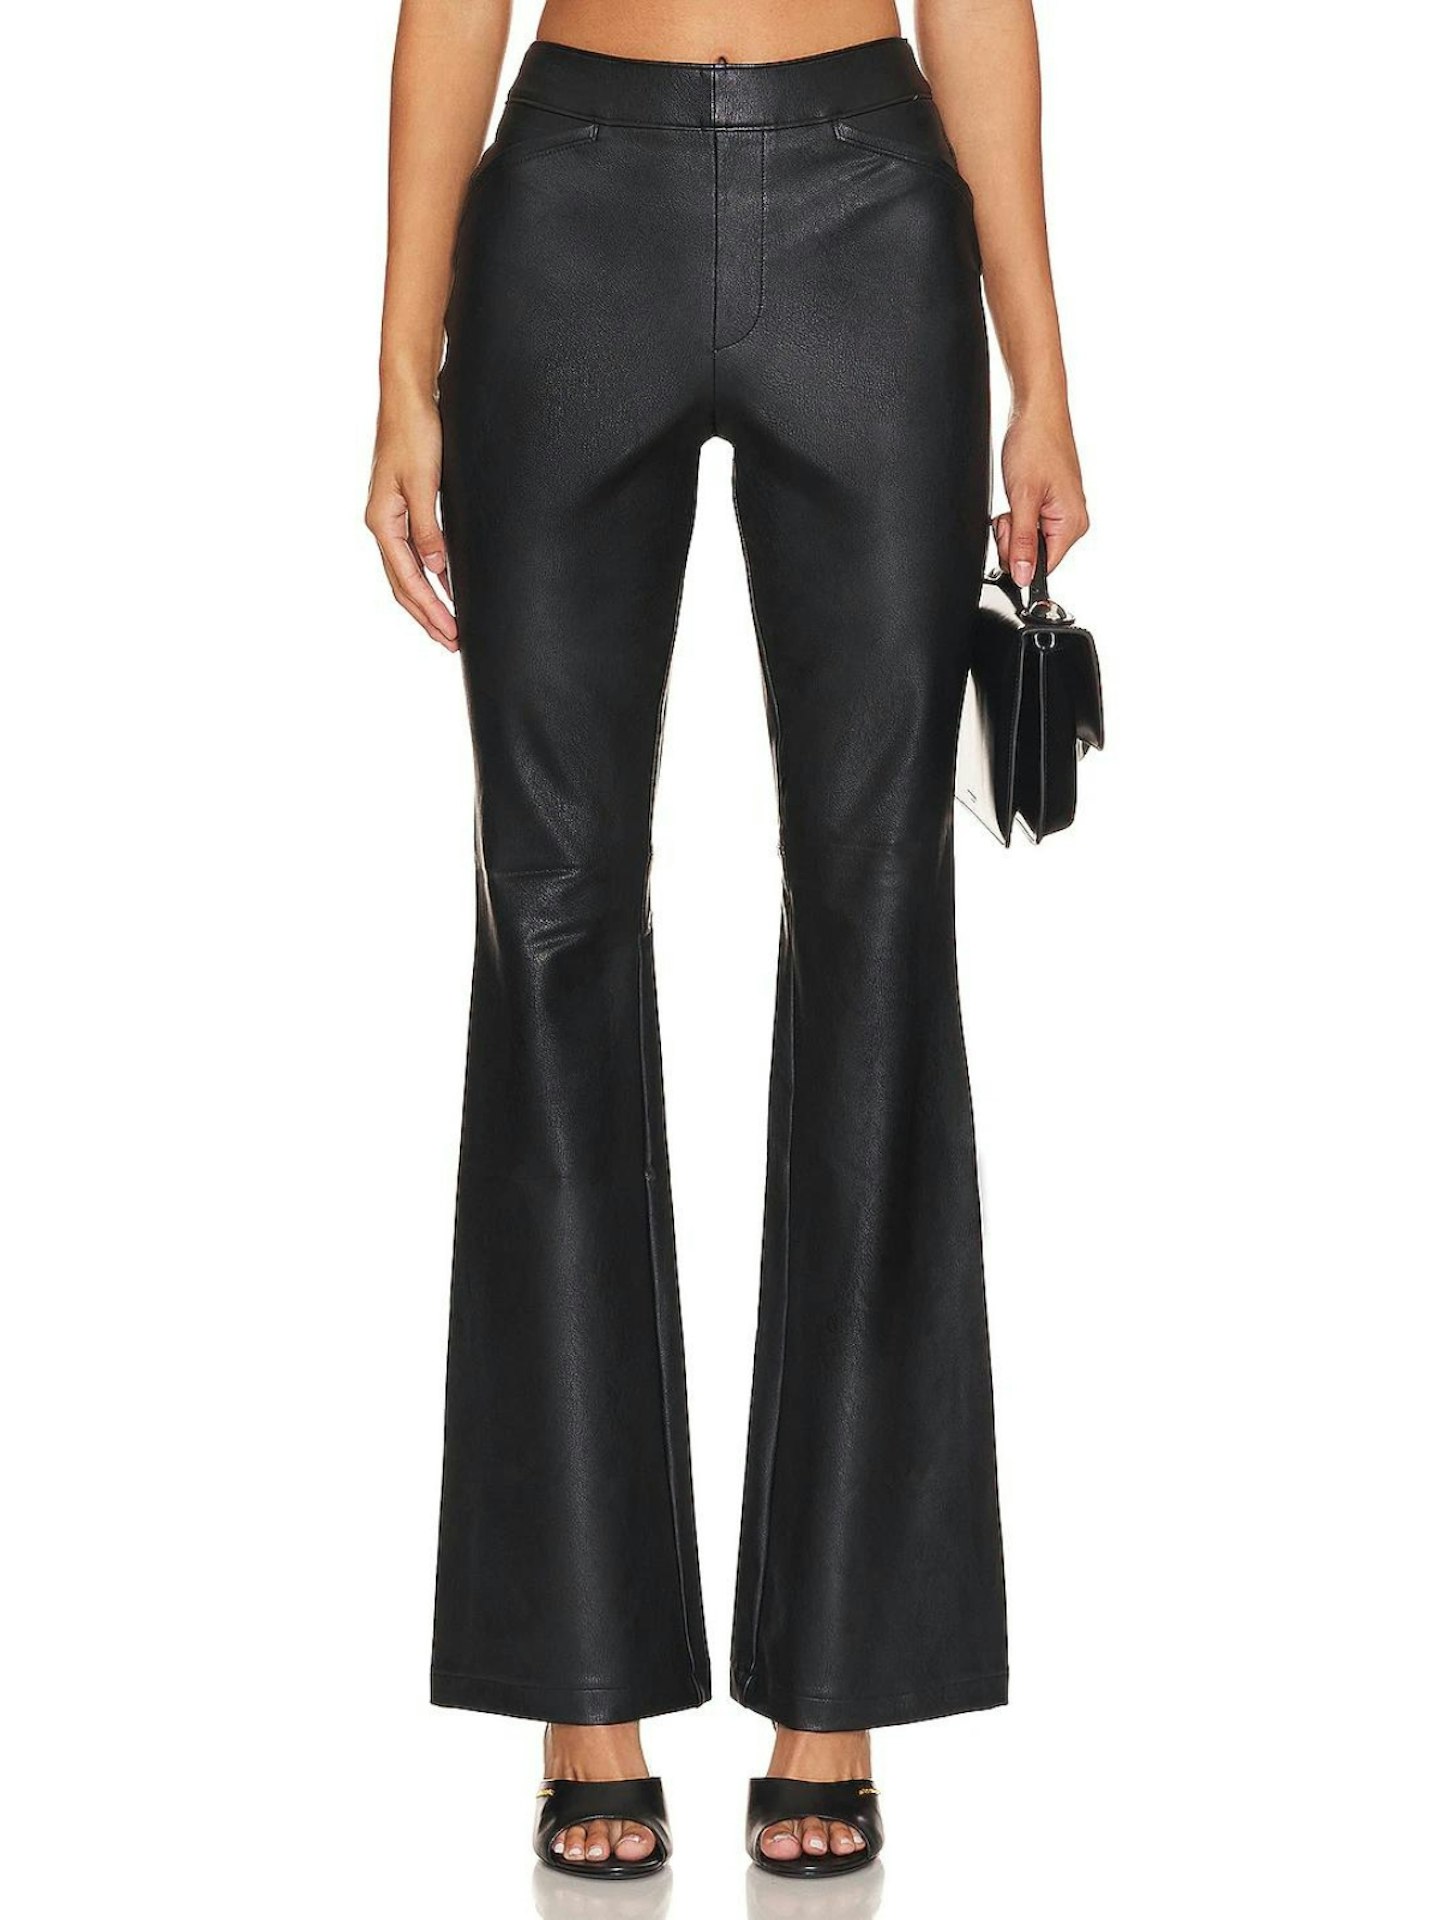 Spanx Flare Leather-Look Pants 